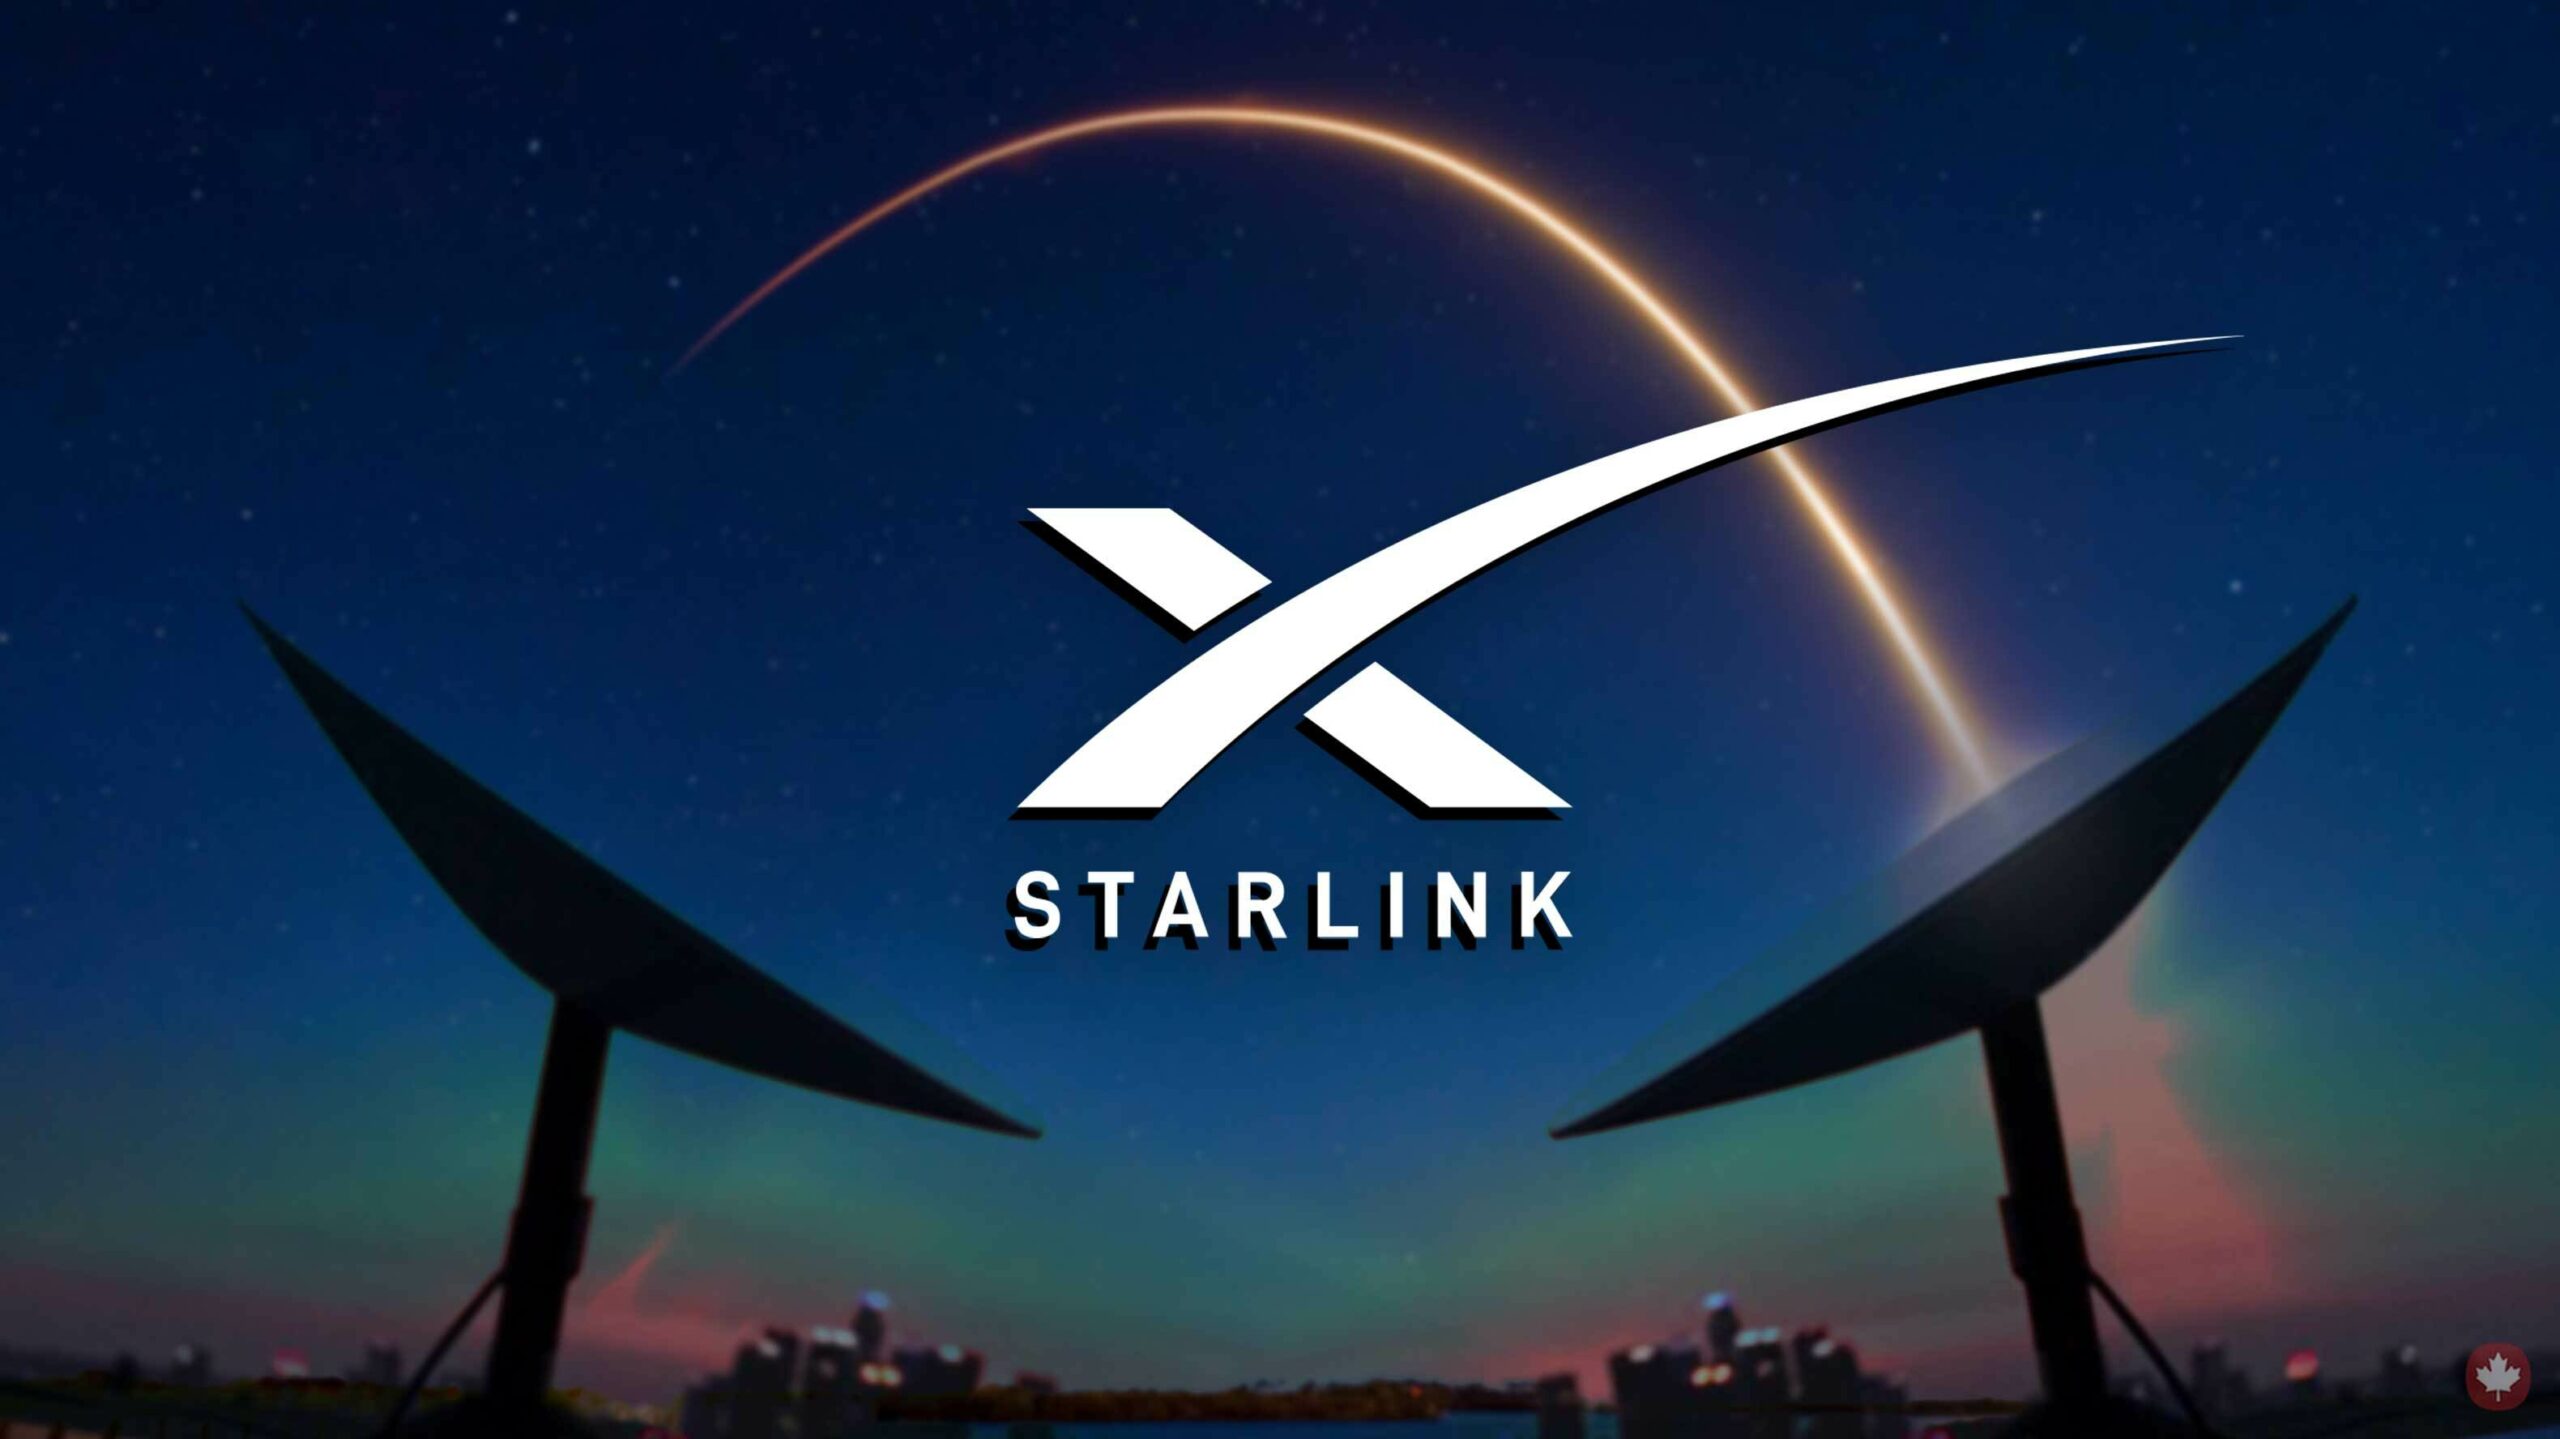 Starlink Satellites: The Future of Internet Connectivity